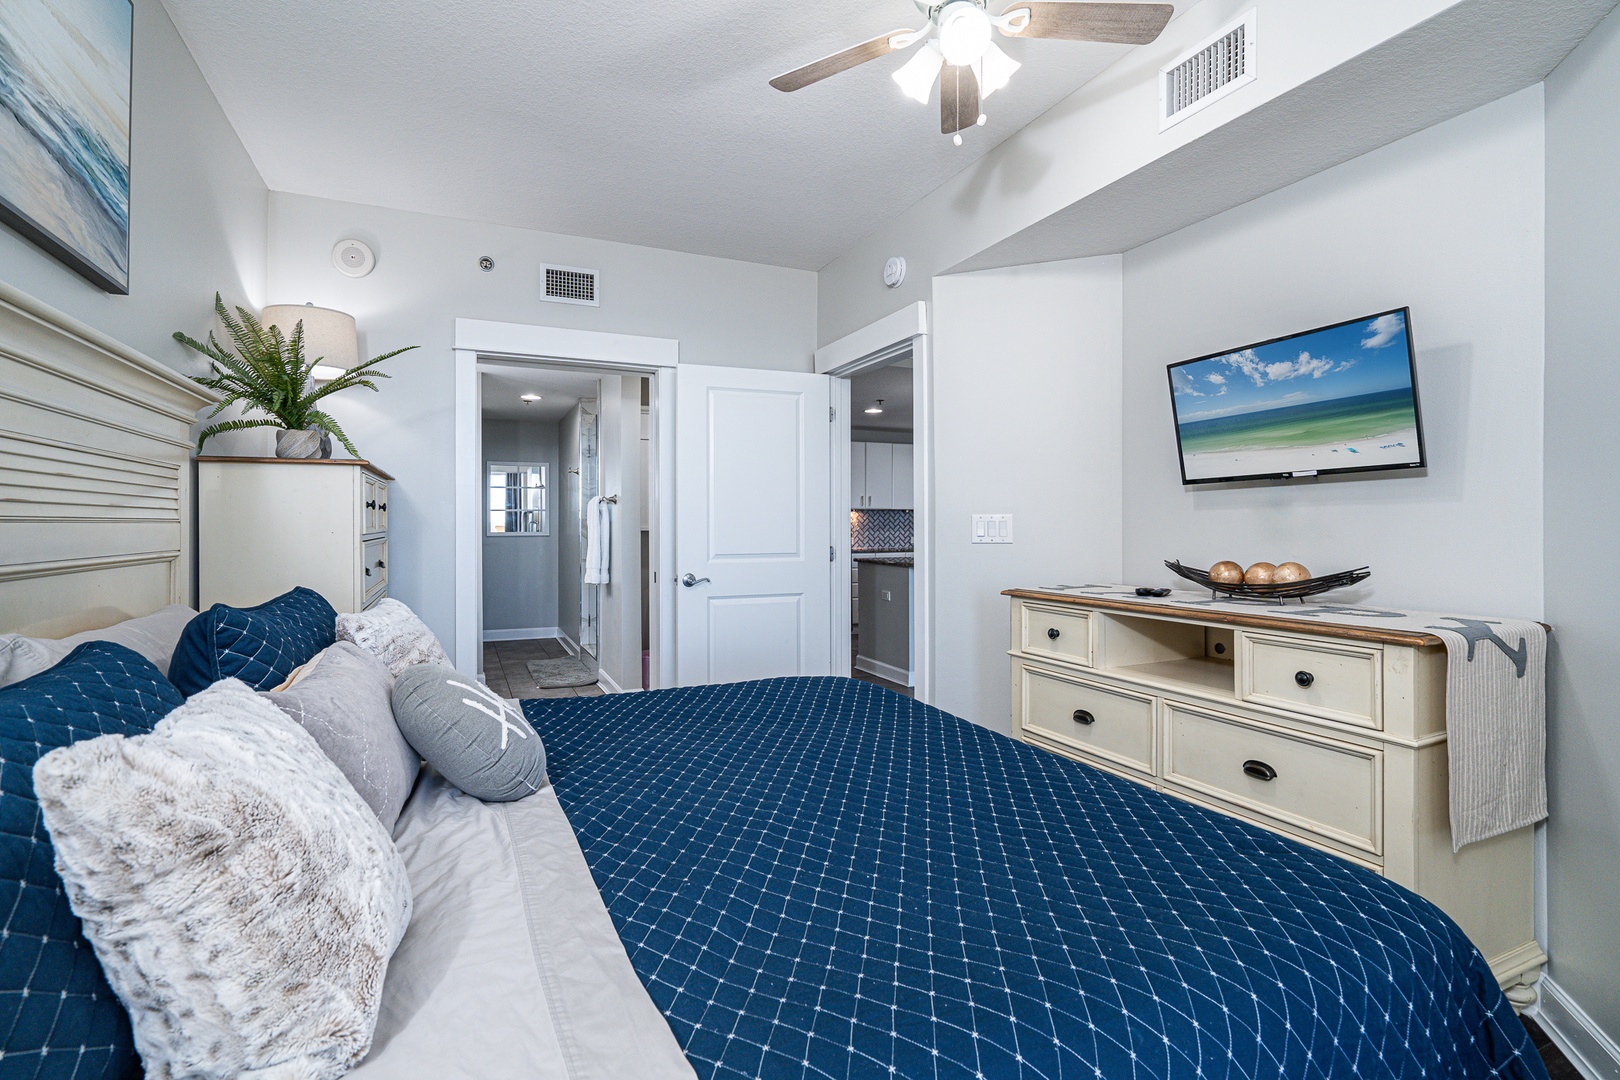 This regal king suite features a balcony and smart tv